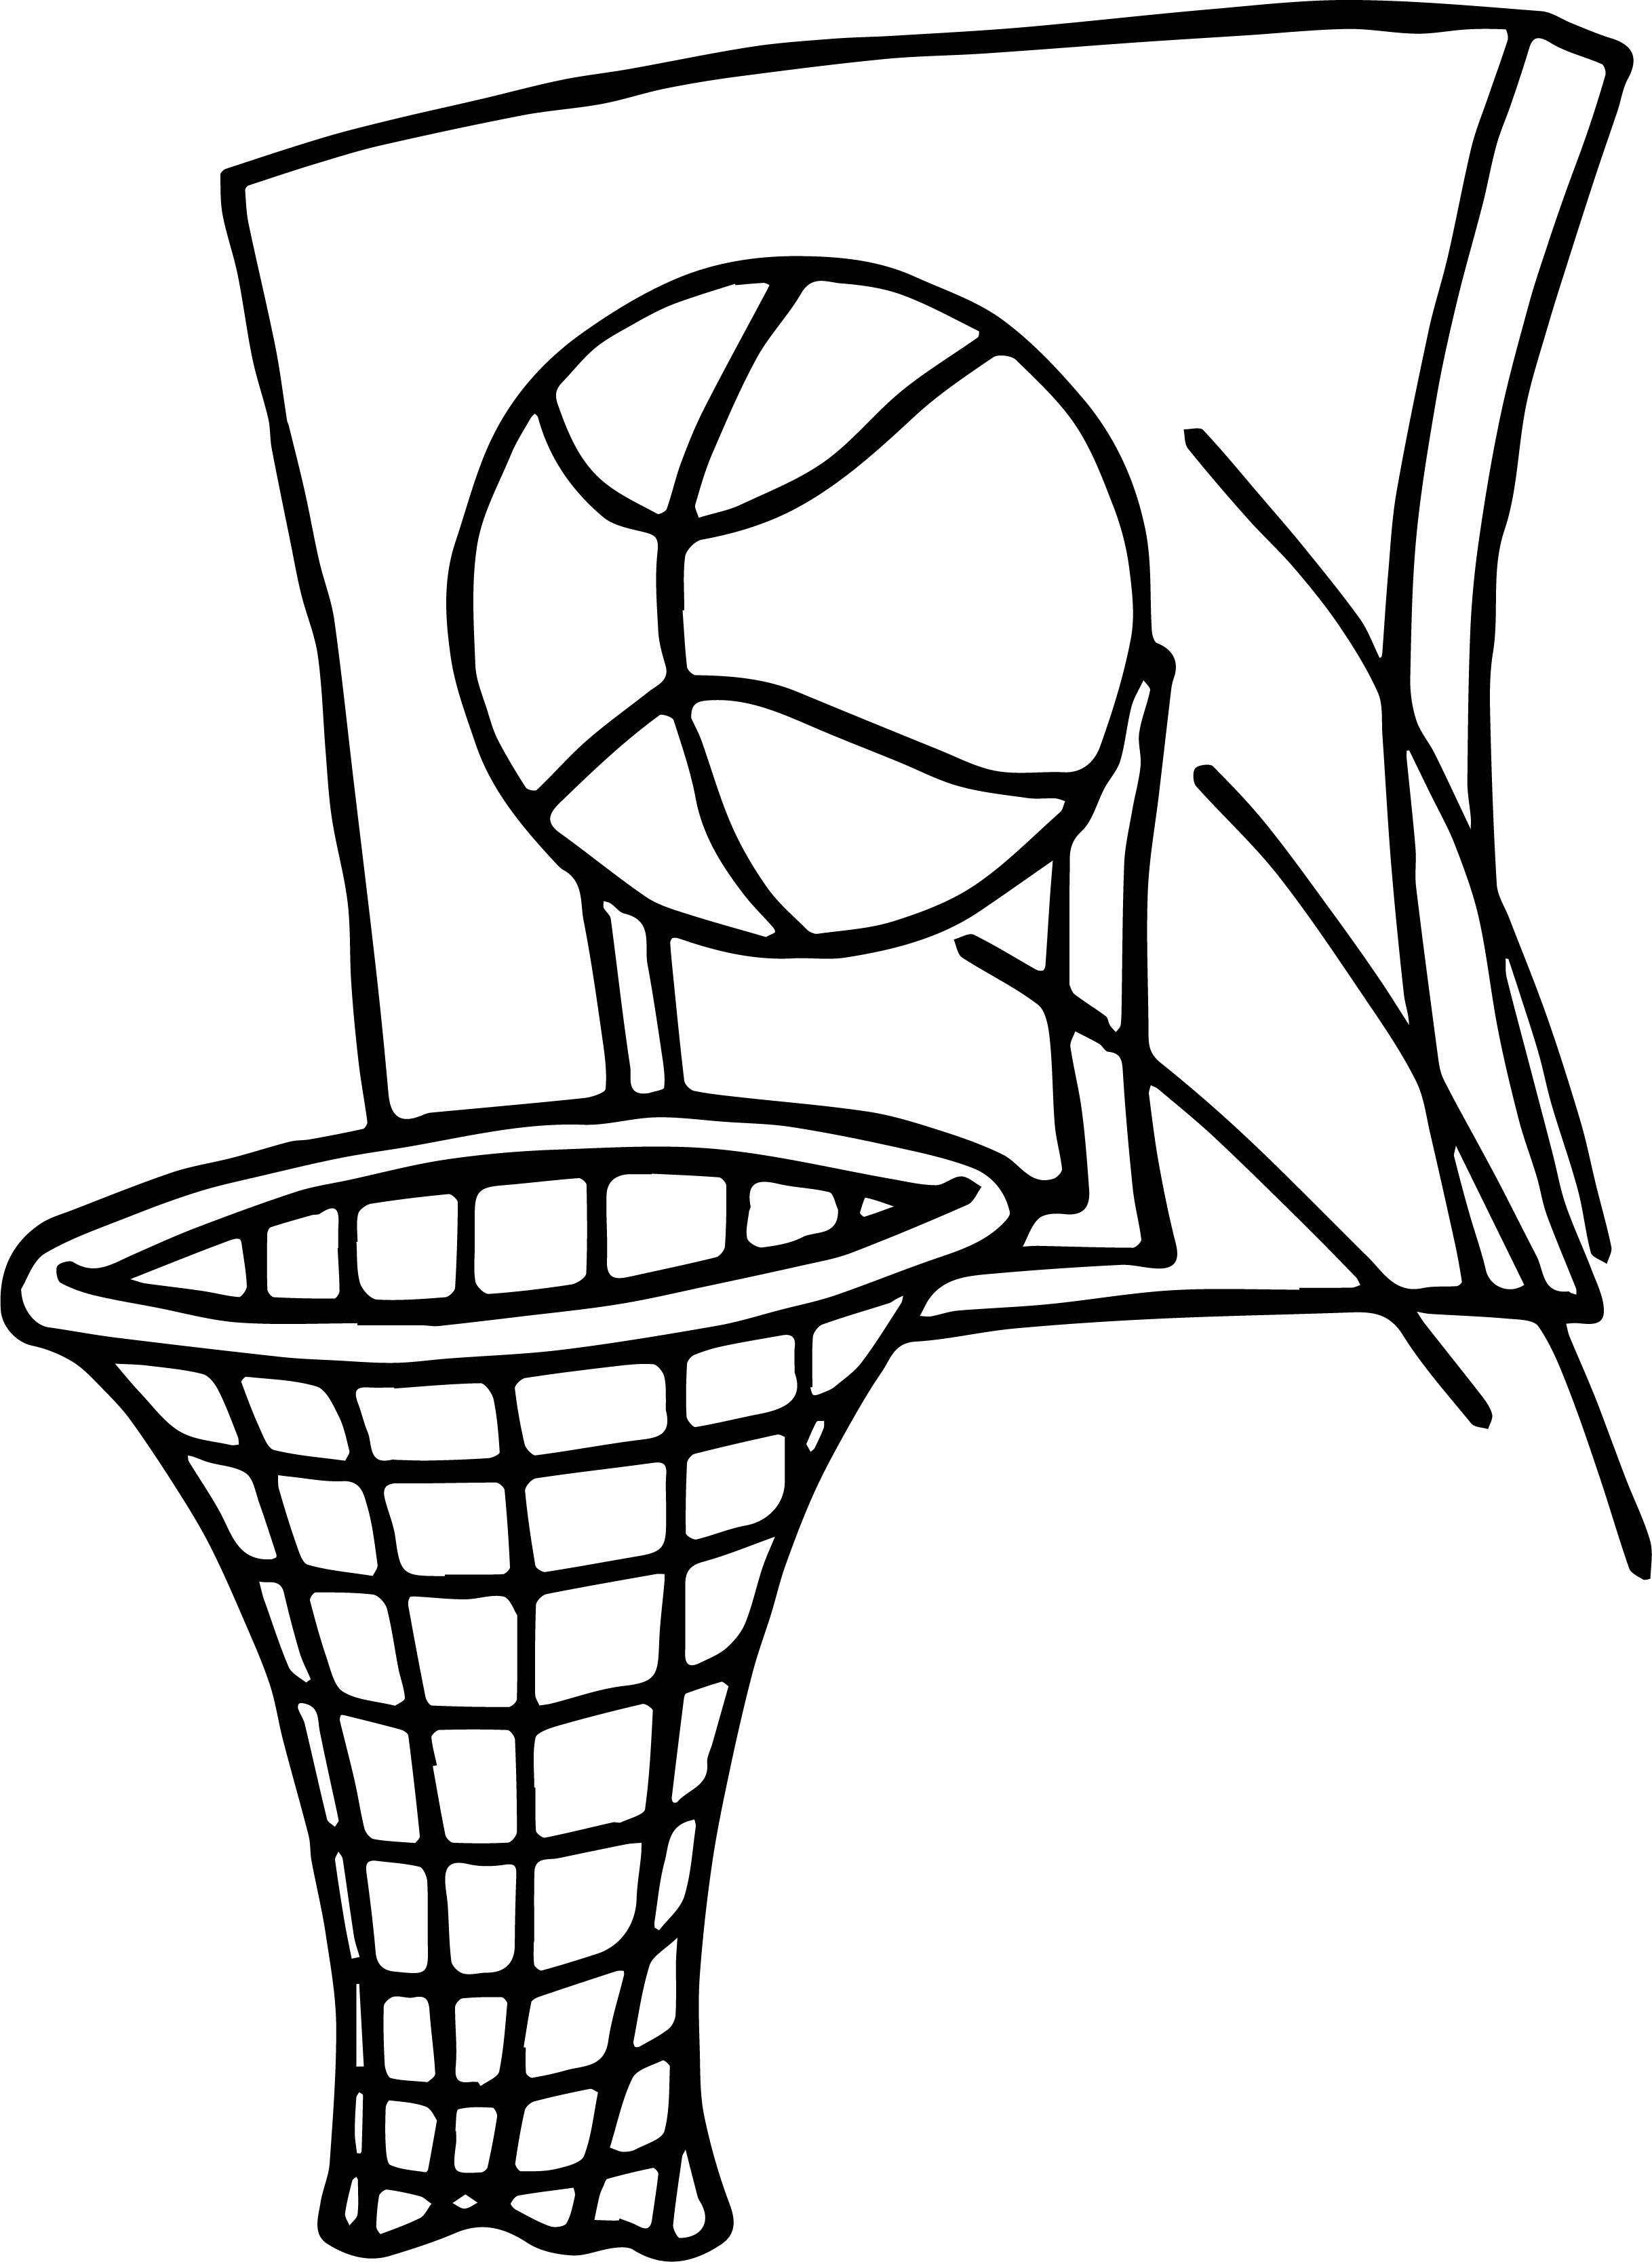 Basketball Goal Coloring Pages at Free printable